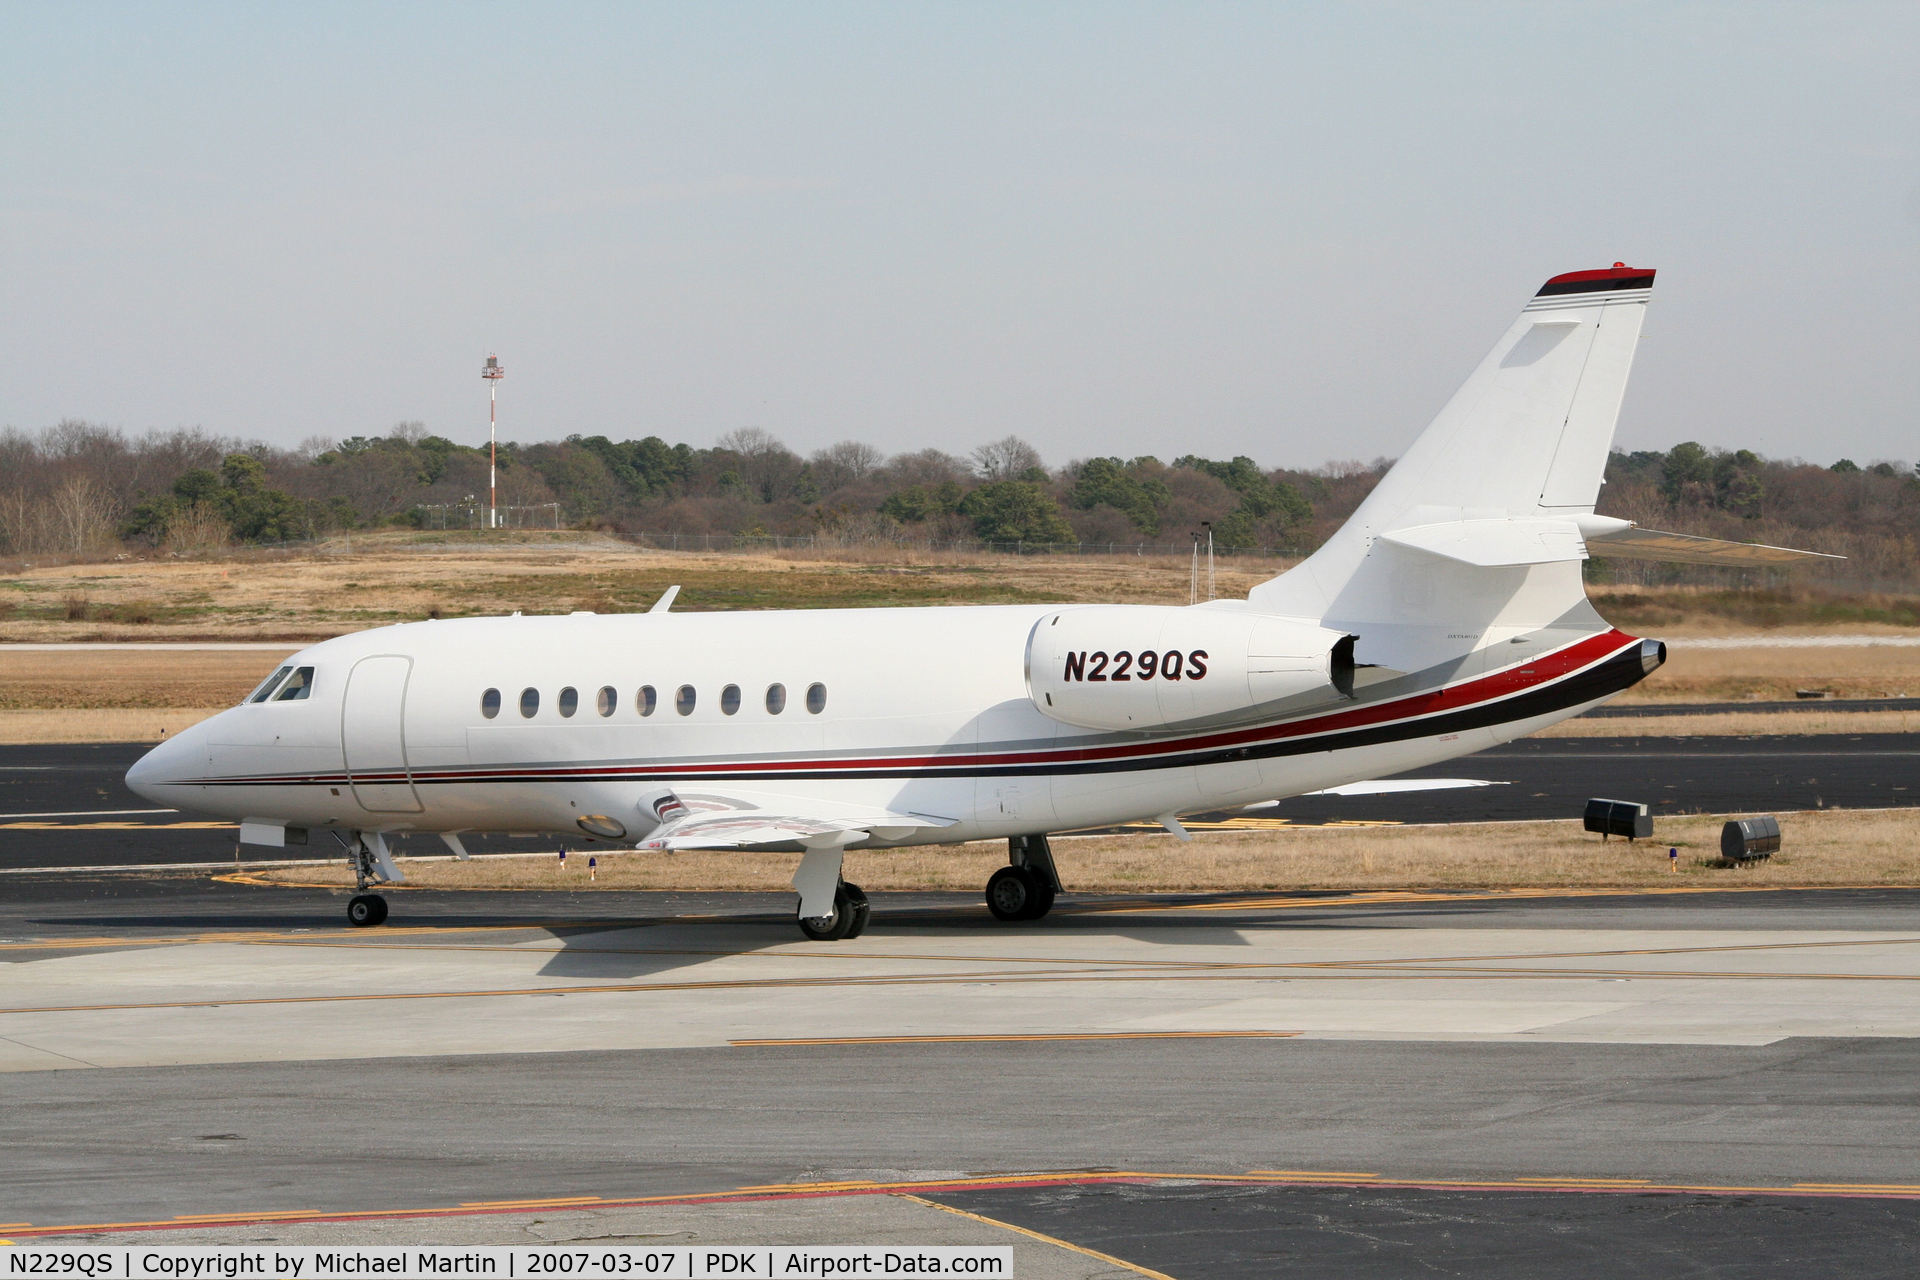 N229QS, 2001 Dassault Falcon 2000 C/N 129, Taxing to Signature Flight Services